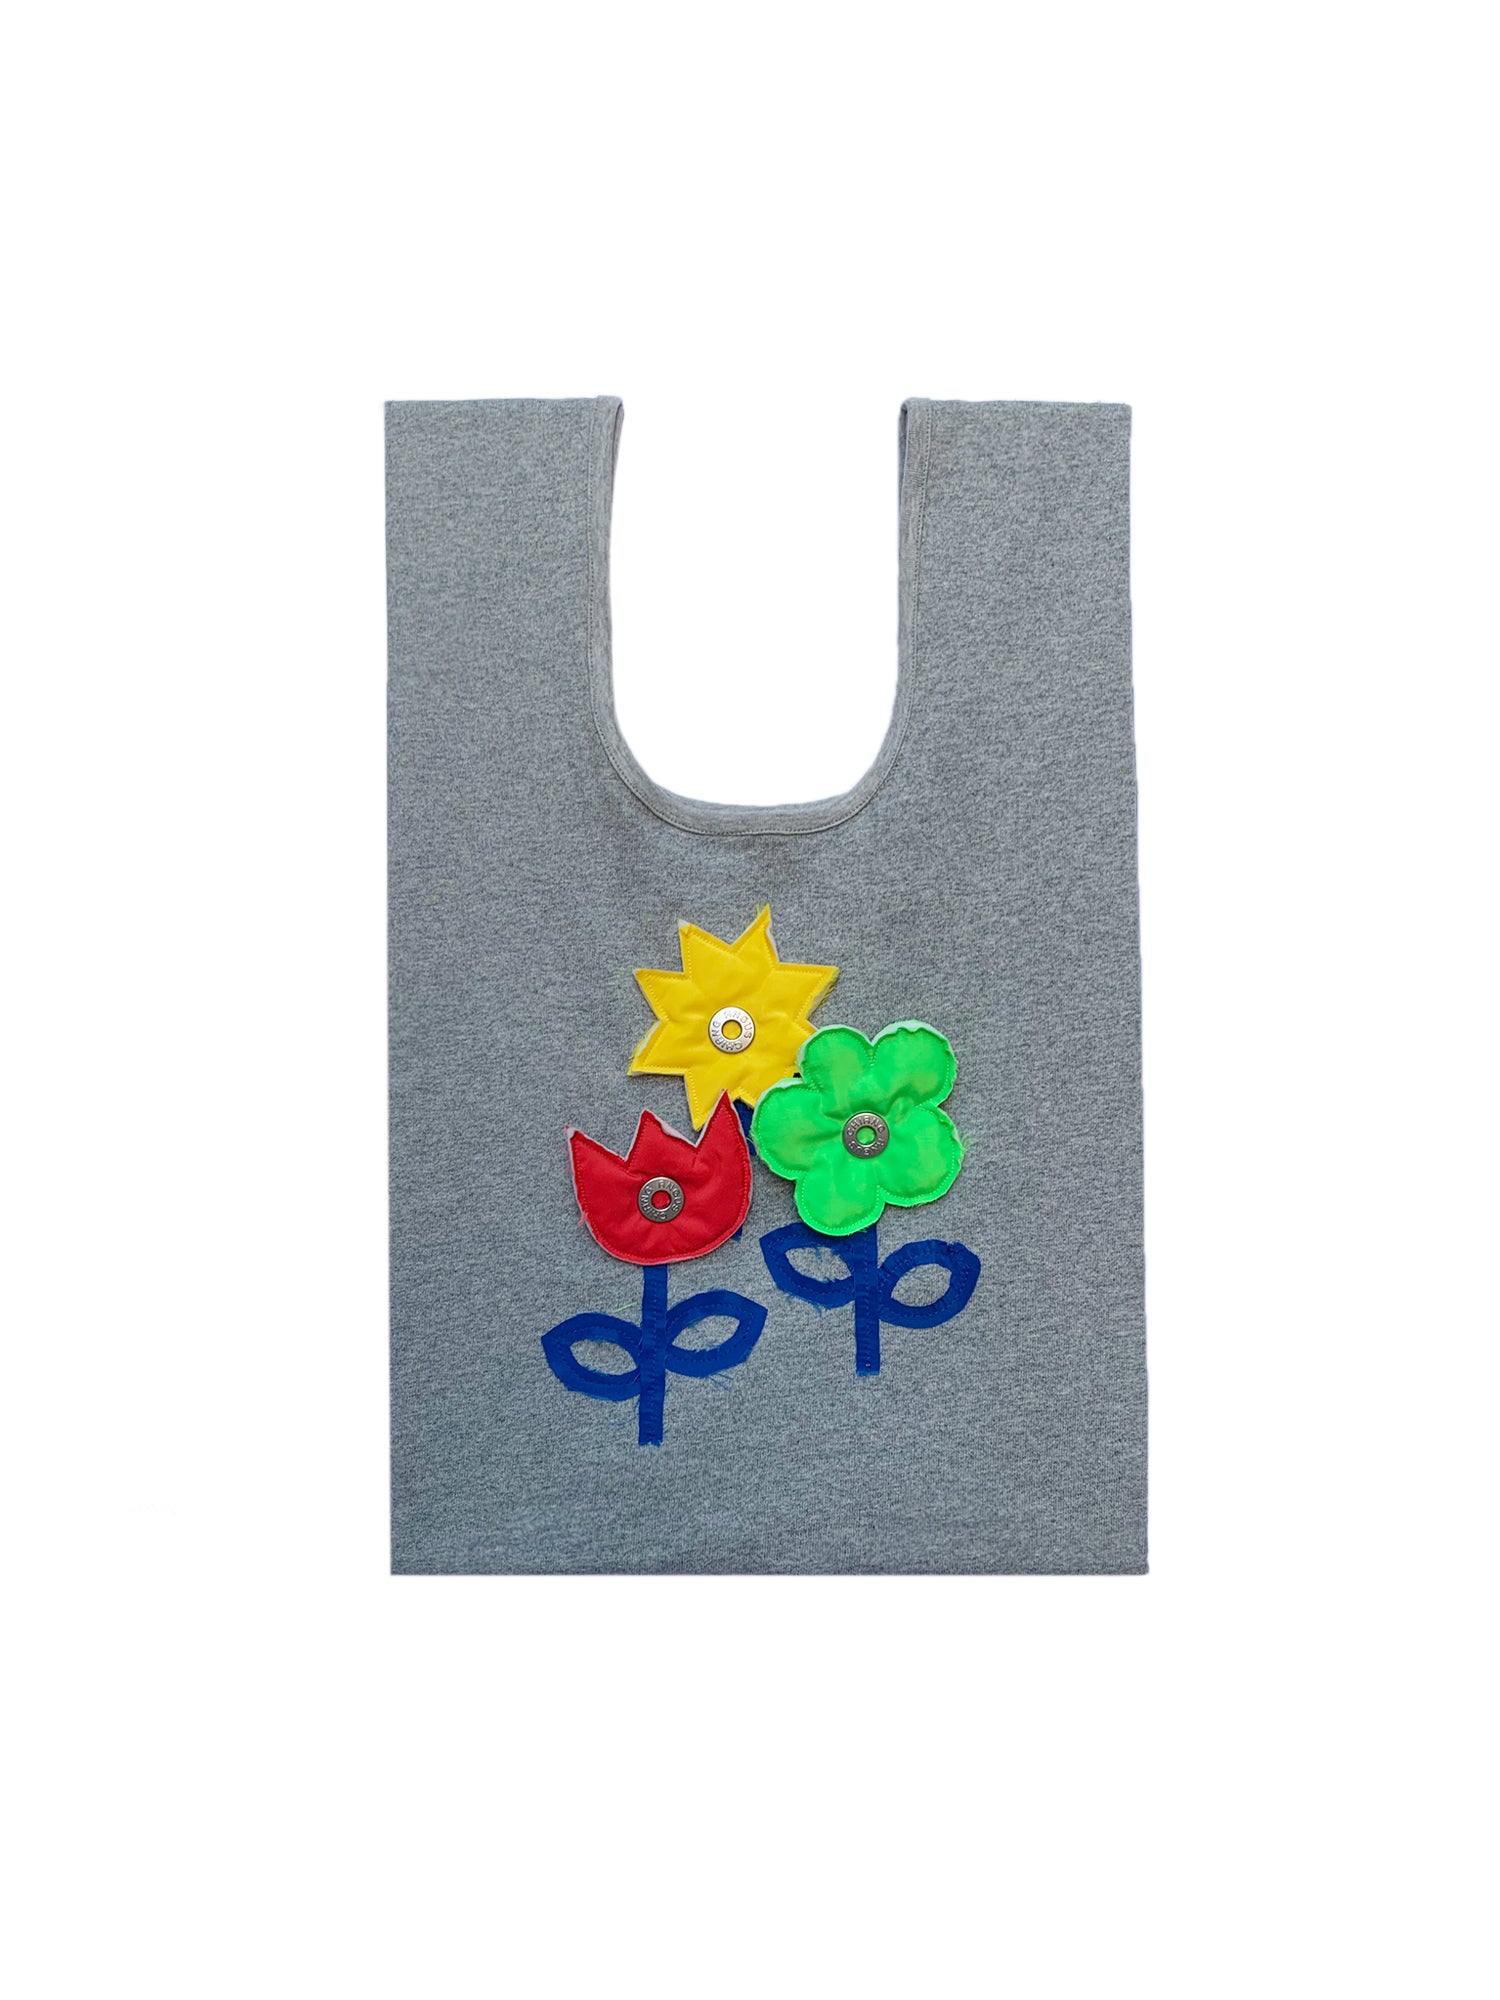 [ HAPPY MOTHER'S DAY ] LET'S GO SHOPPING BAG